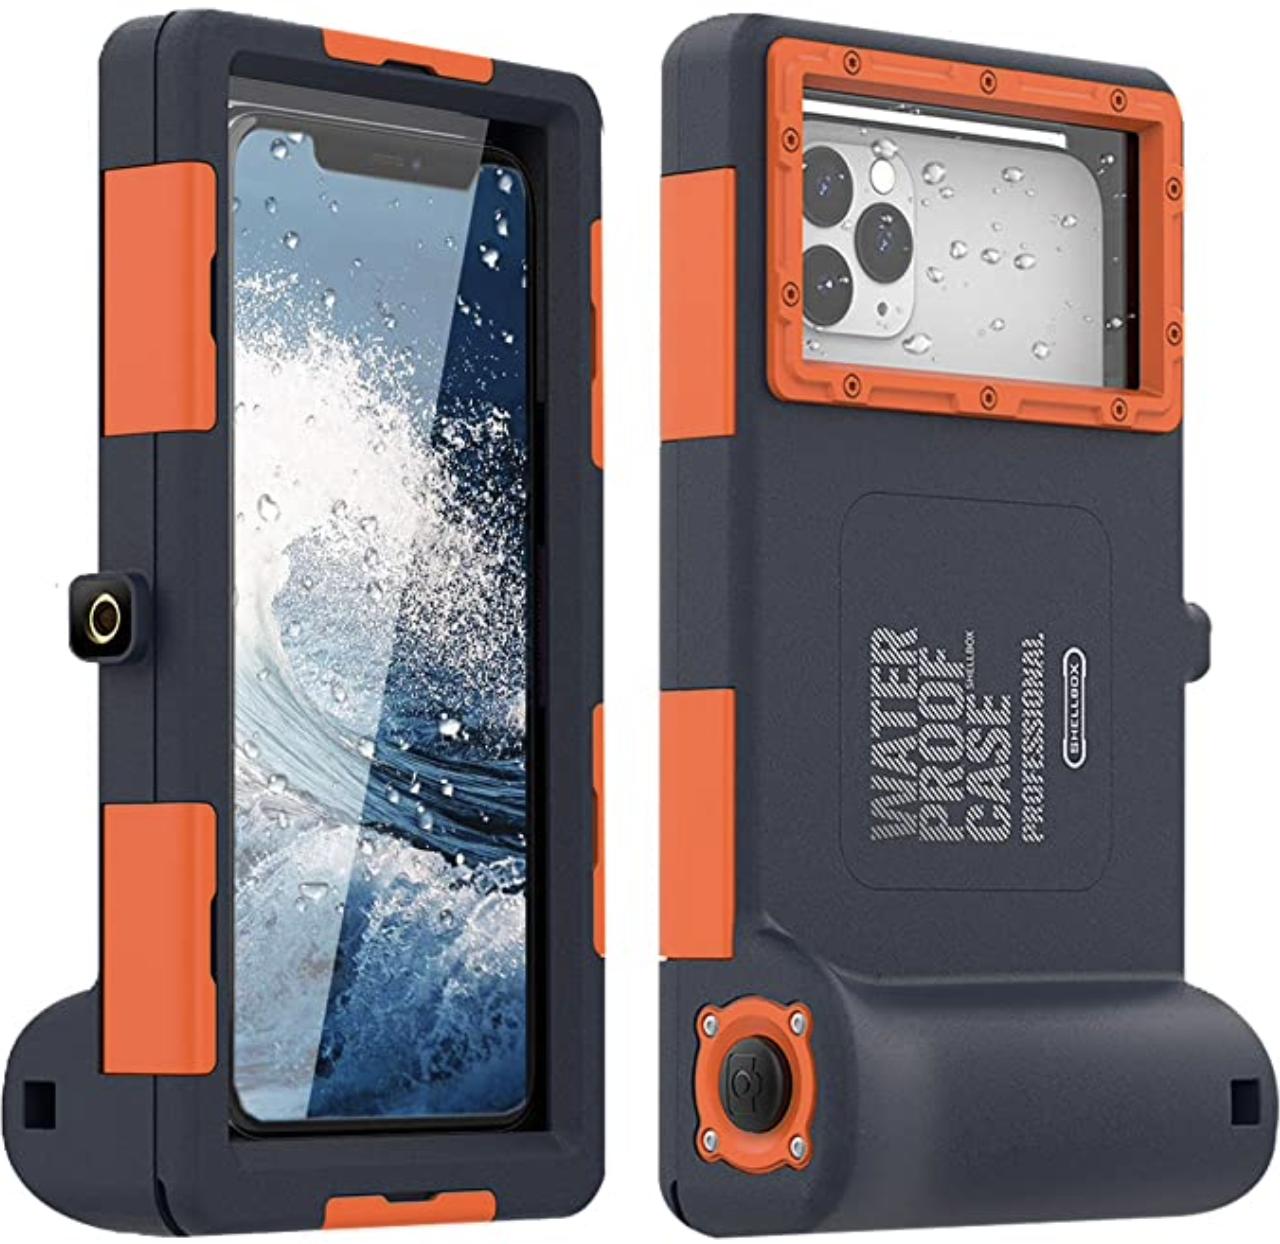 Yogre Diving Iphone Case Render Cropped